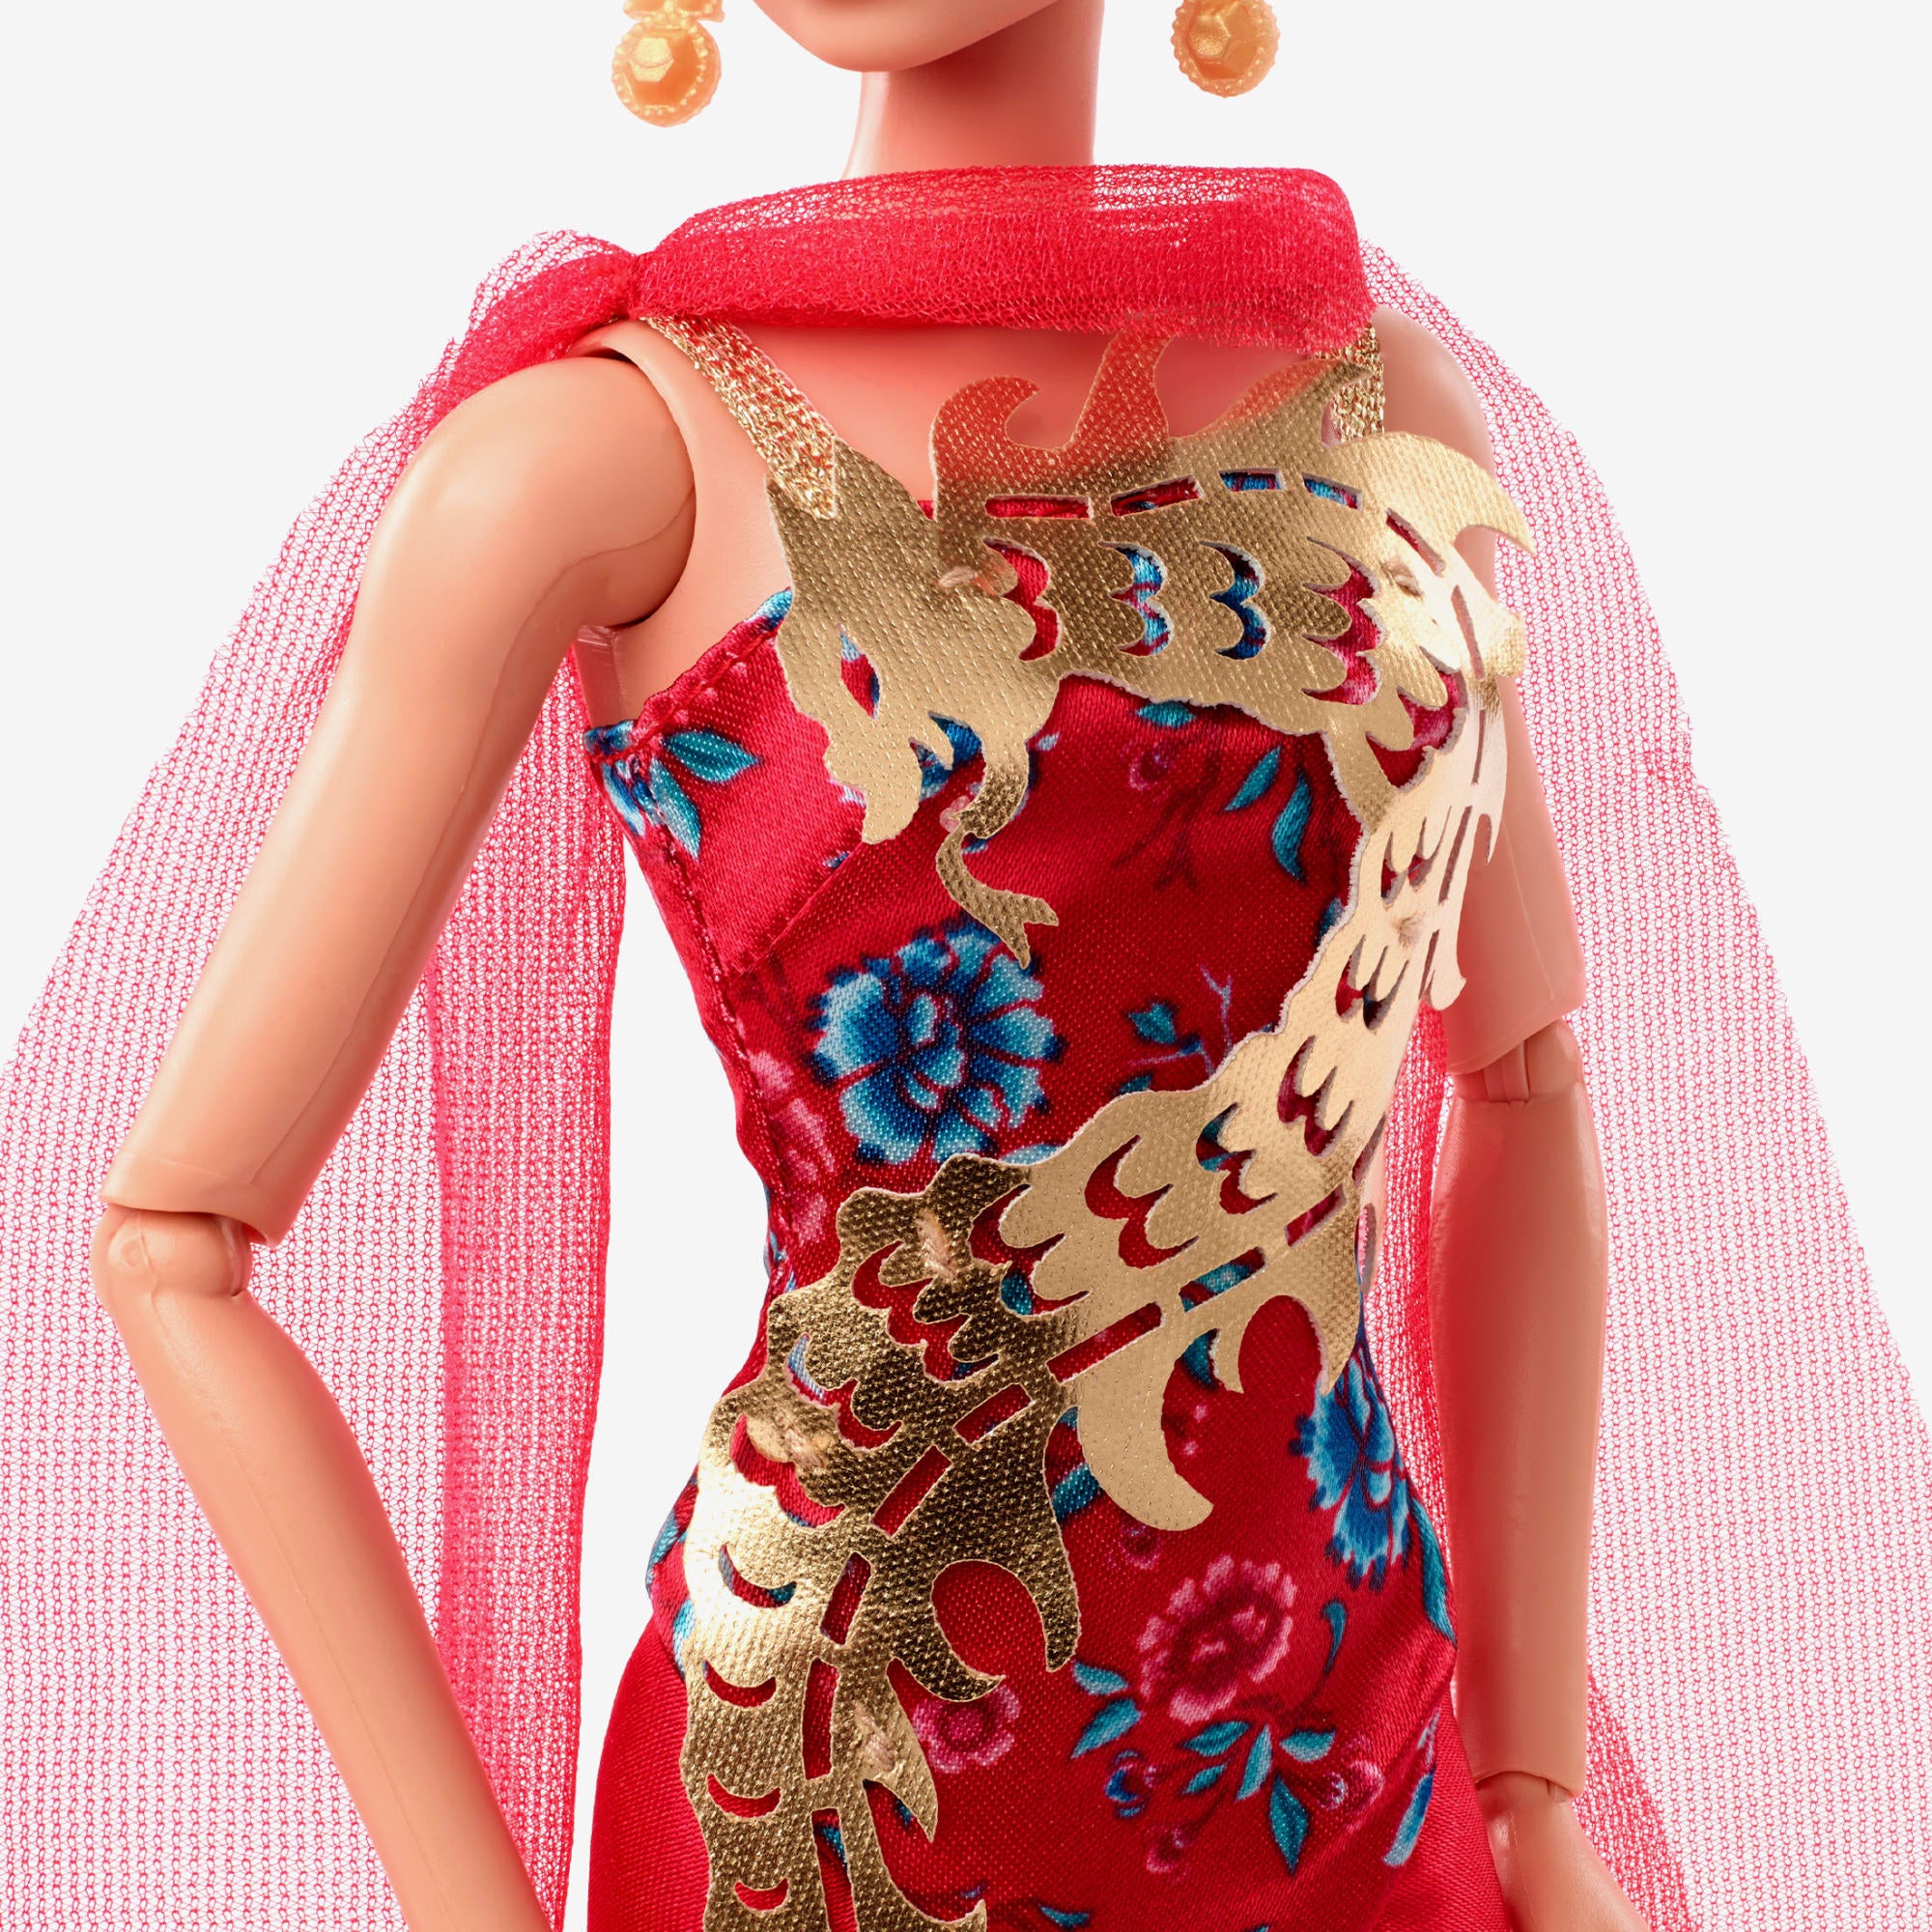 Barbie Signature Collection Women Who Inspire Anna May Wong